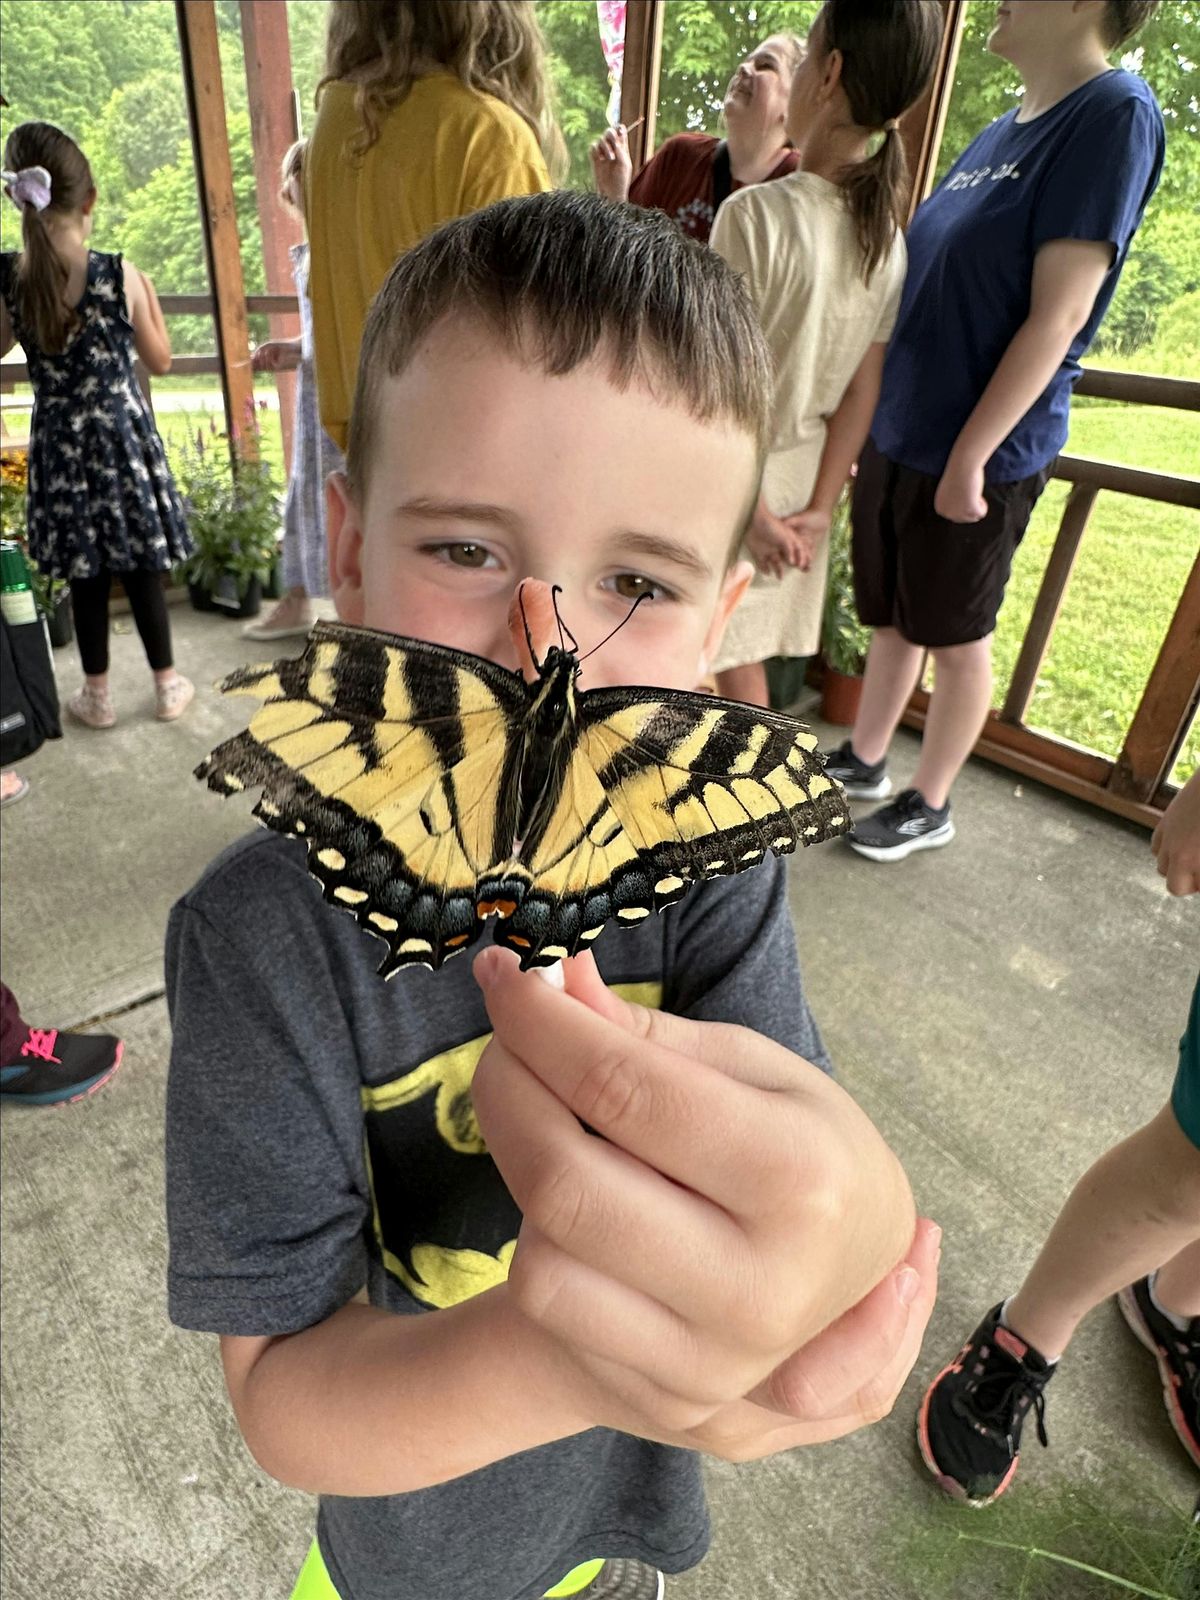 Interacting with Nature: Butterflies at the Butterfly Exhibit